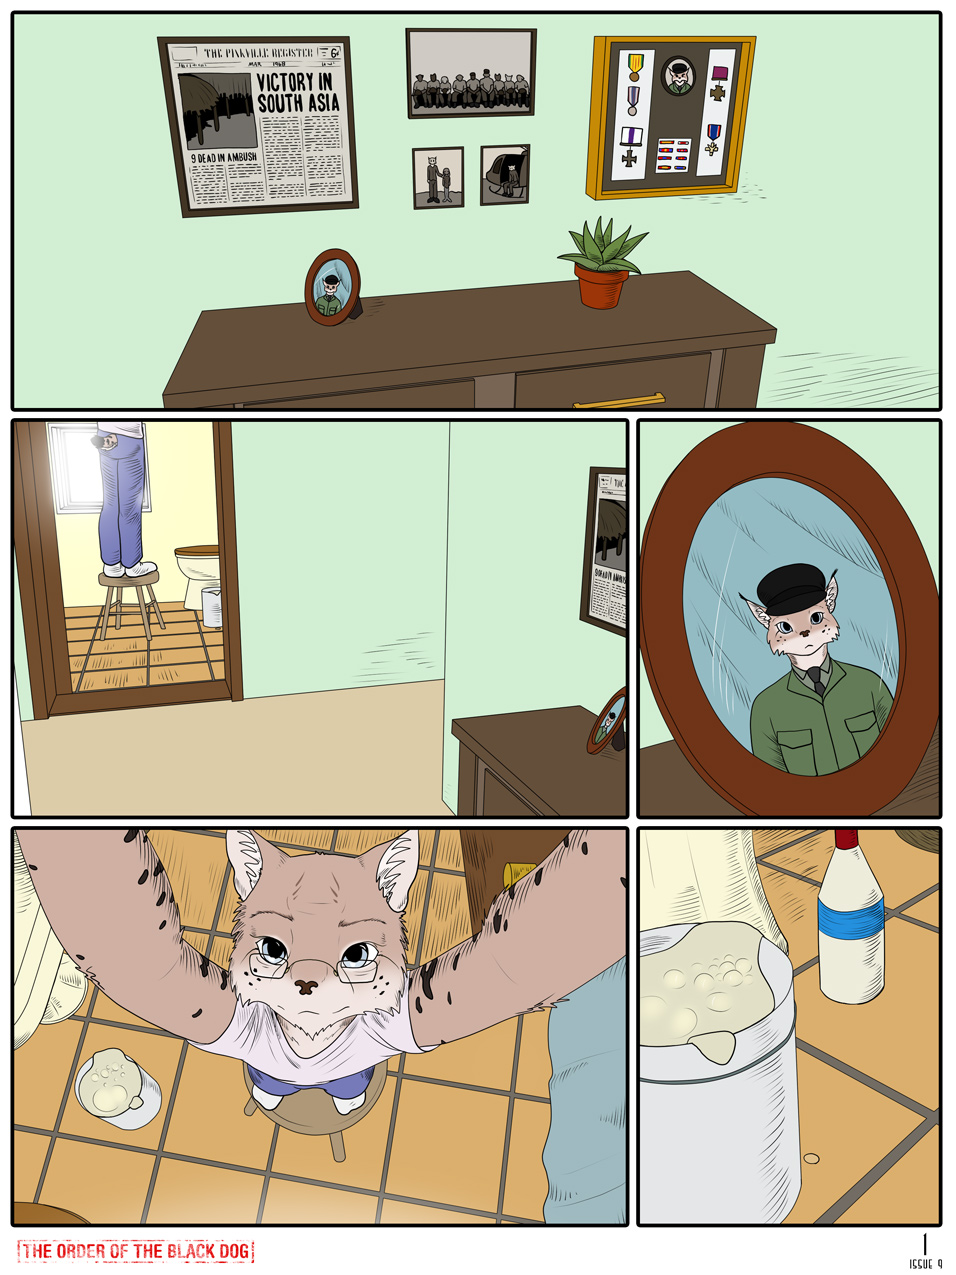 Issue 9, Page 1